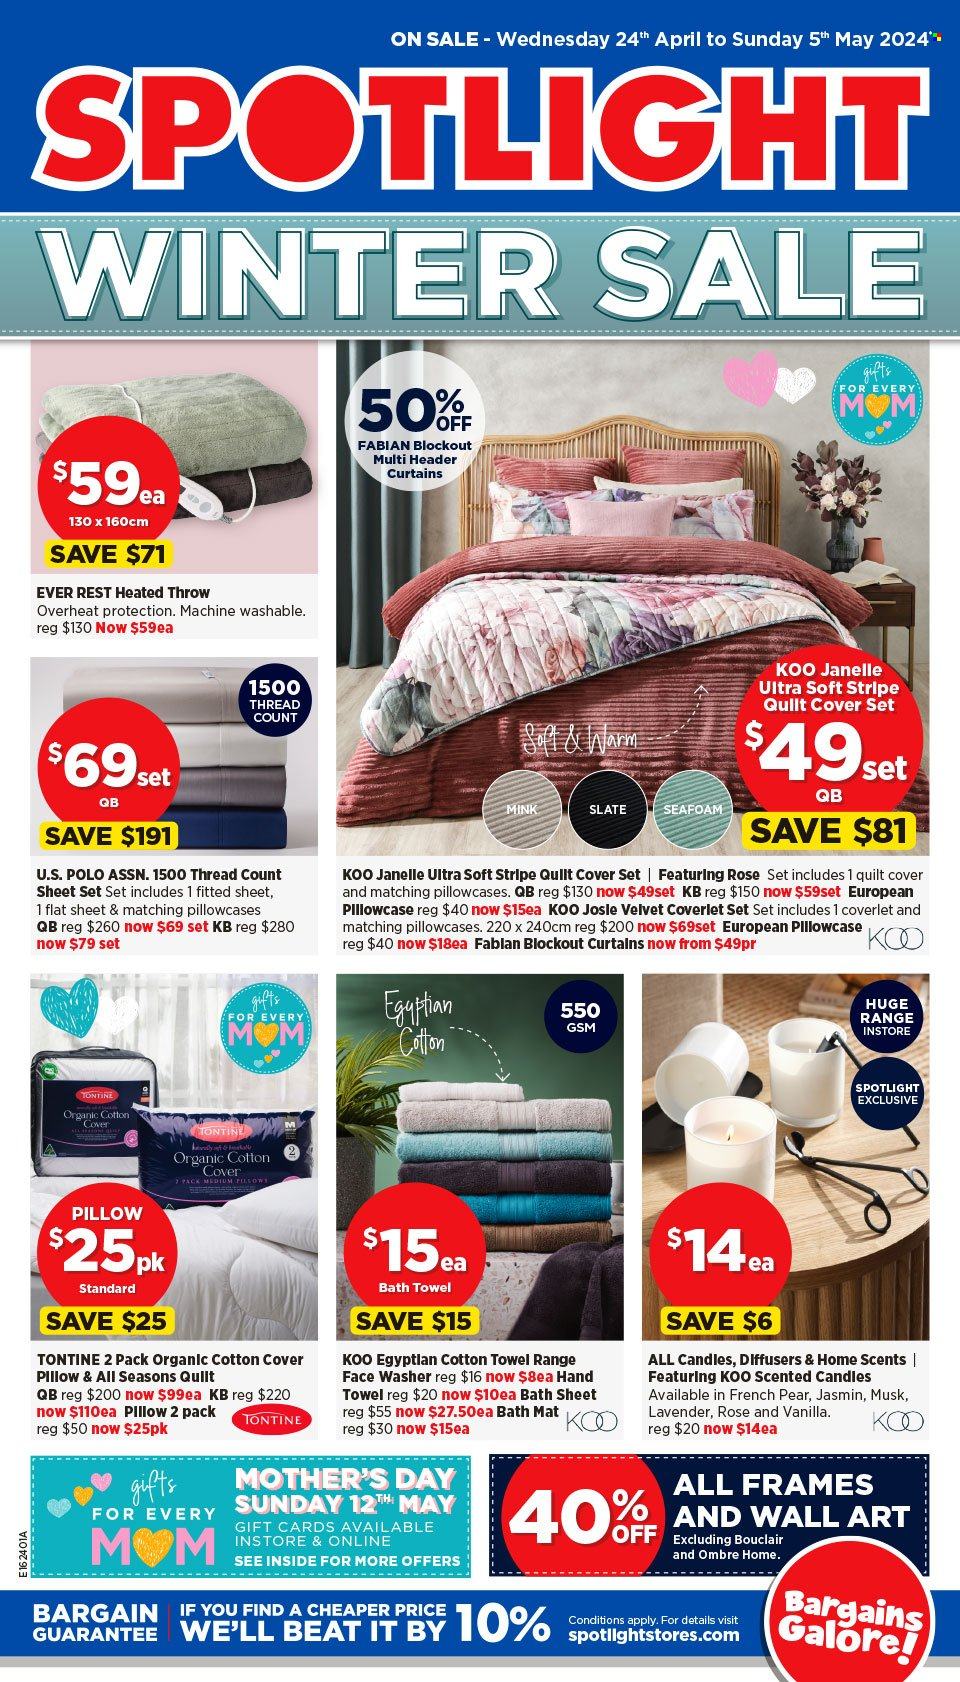 thumbnail - Spotlight Catalogue - 24 Apr 2024 - 5 May 2024 - Sales products - candle, diffuser, scented candle, pillow, bedding, blanket, pillowcase, curtain, quilt cover set, bed sheet, bath mat, bath towel, towel, hand towel, bath sheet, wall decor, lavender. Page 1.